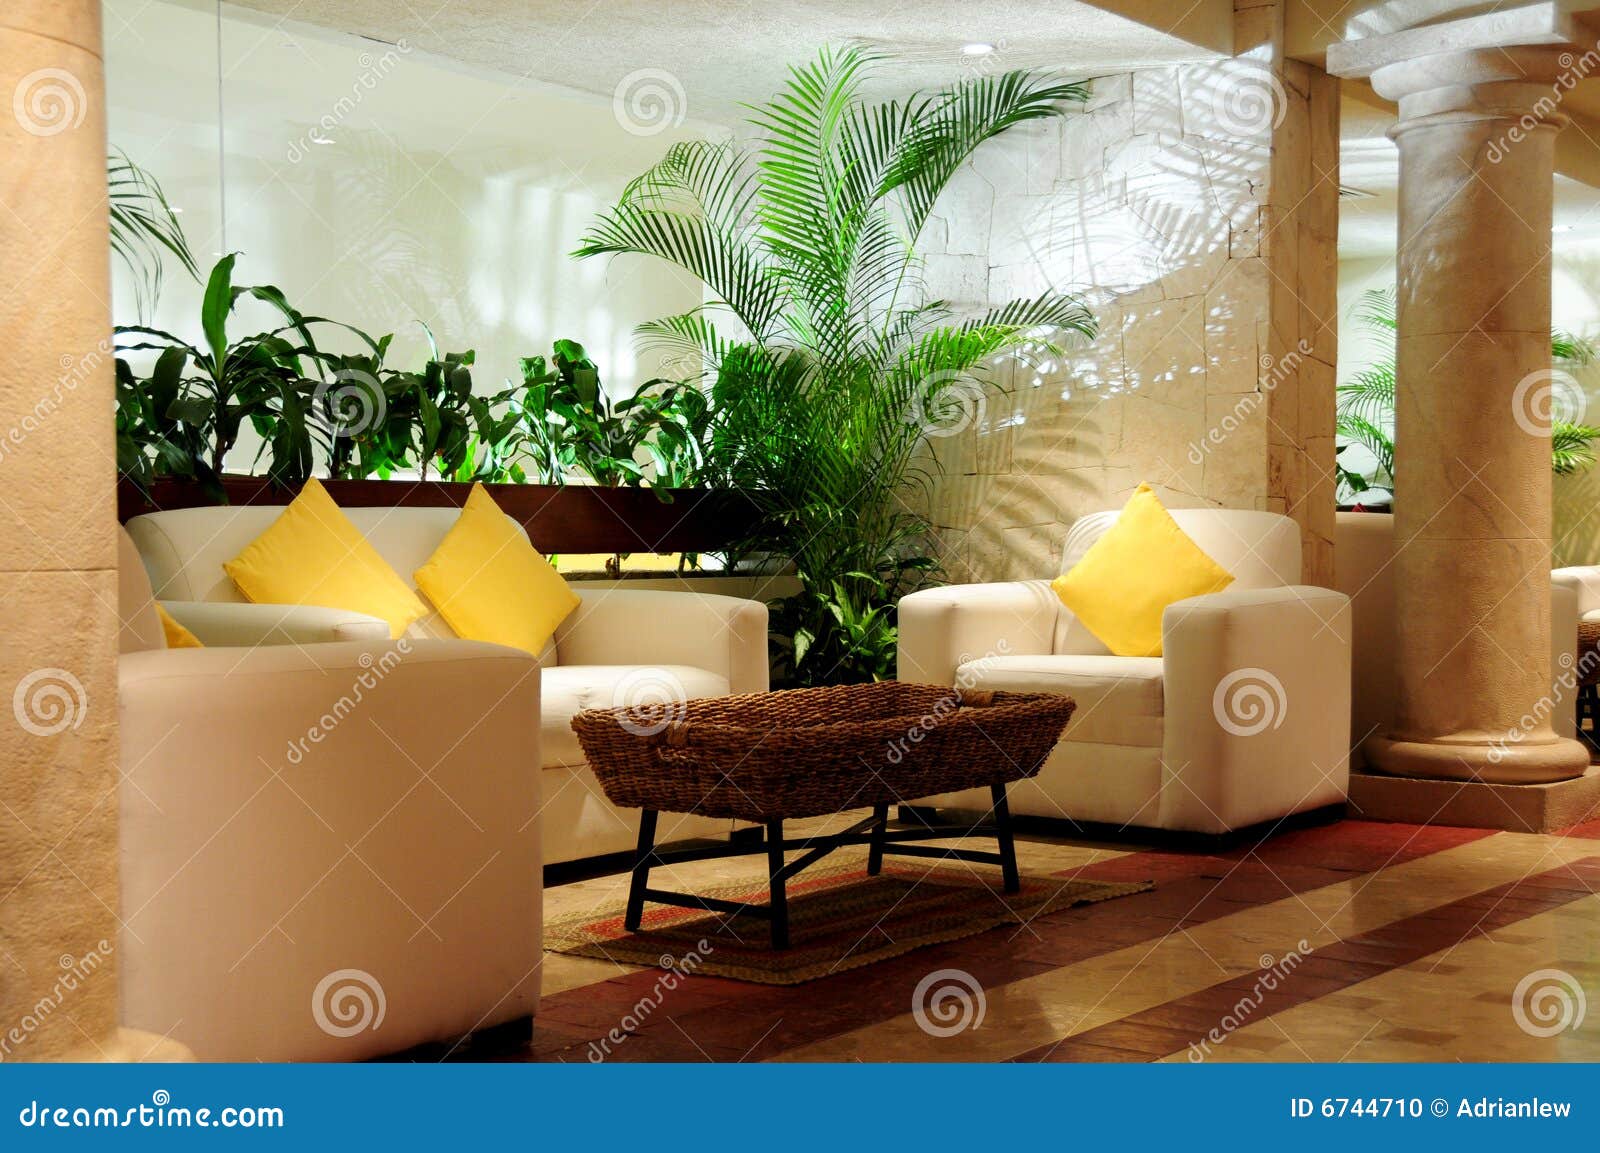 luxurious seating in lobby